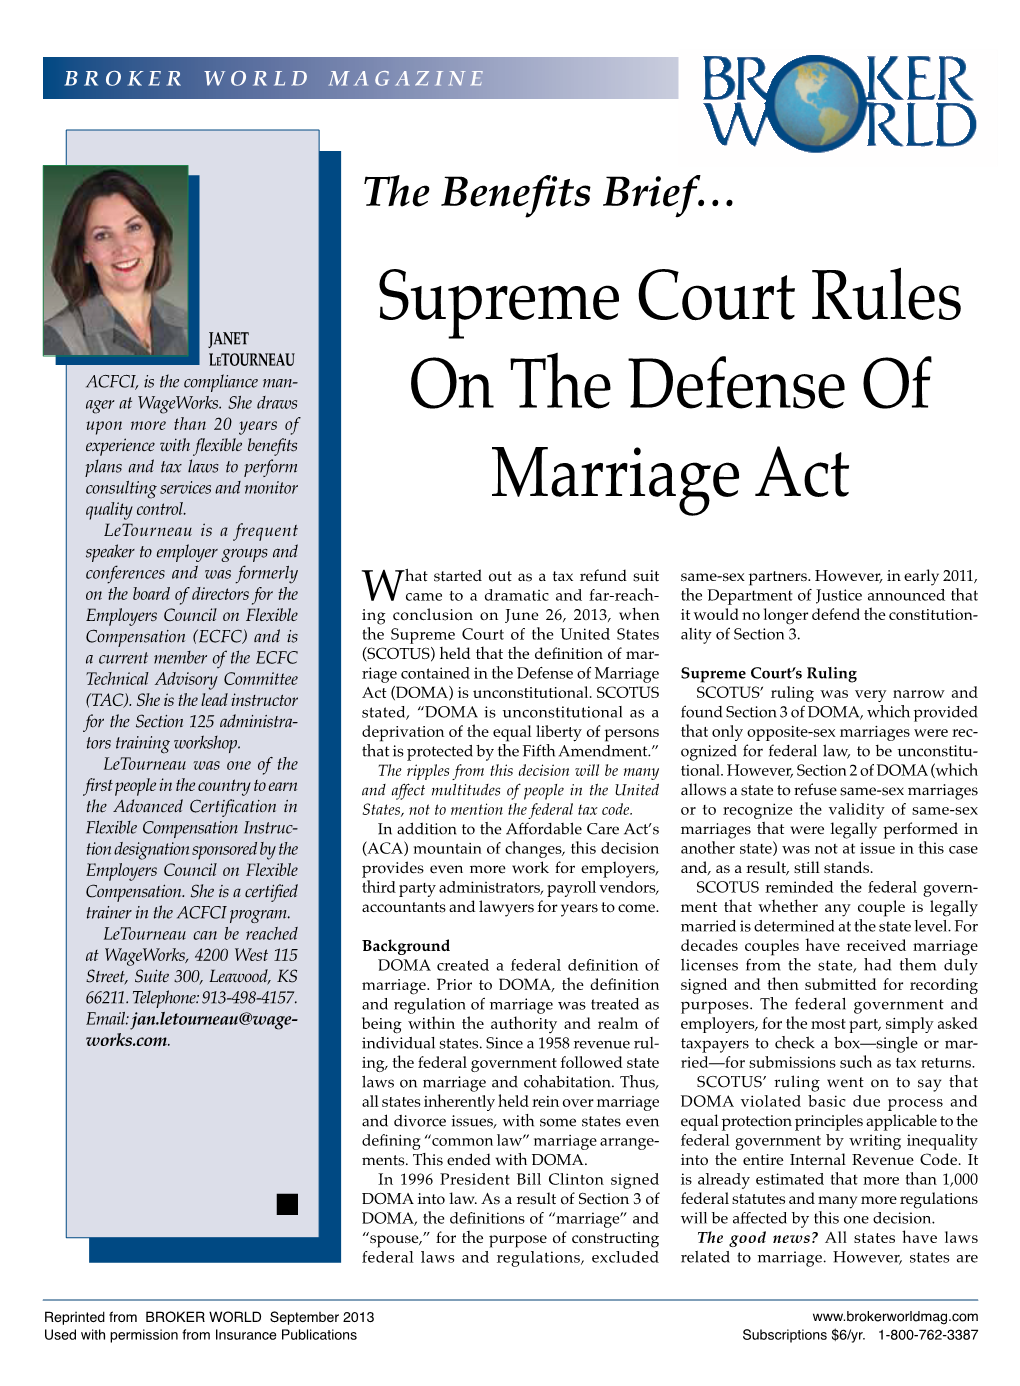 Supreme Court Rules on the Defense of Marriage Act